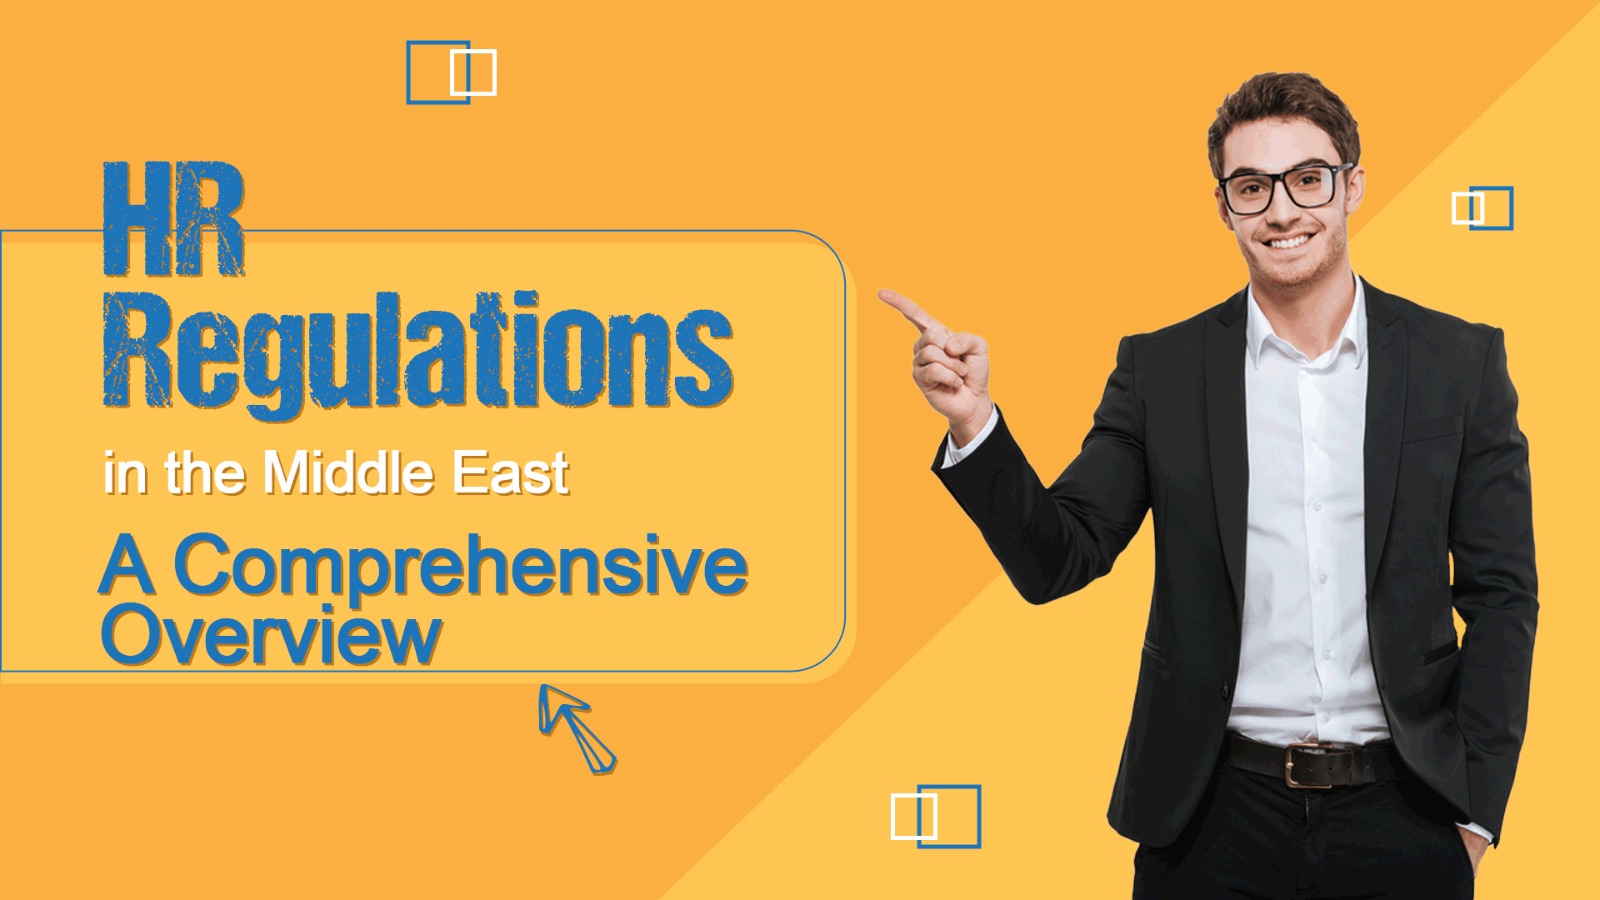 HR Regulations in the Middle East: A Comprehensive Overview